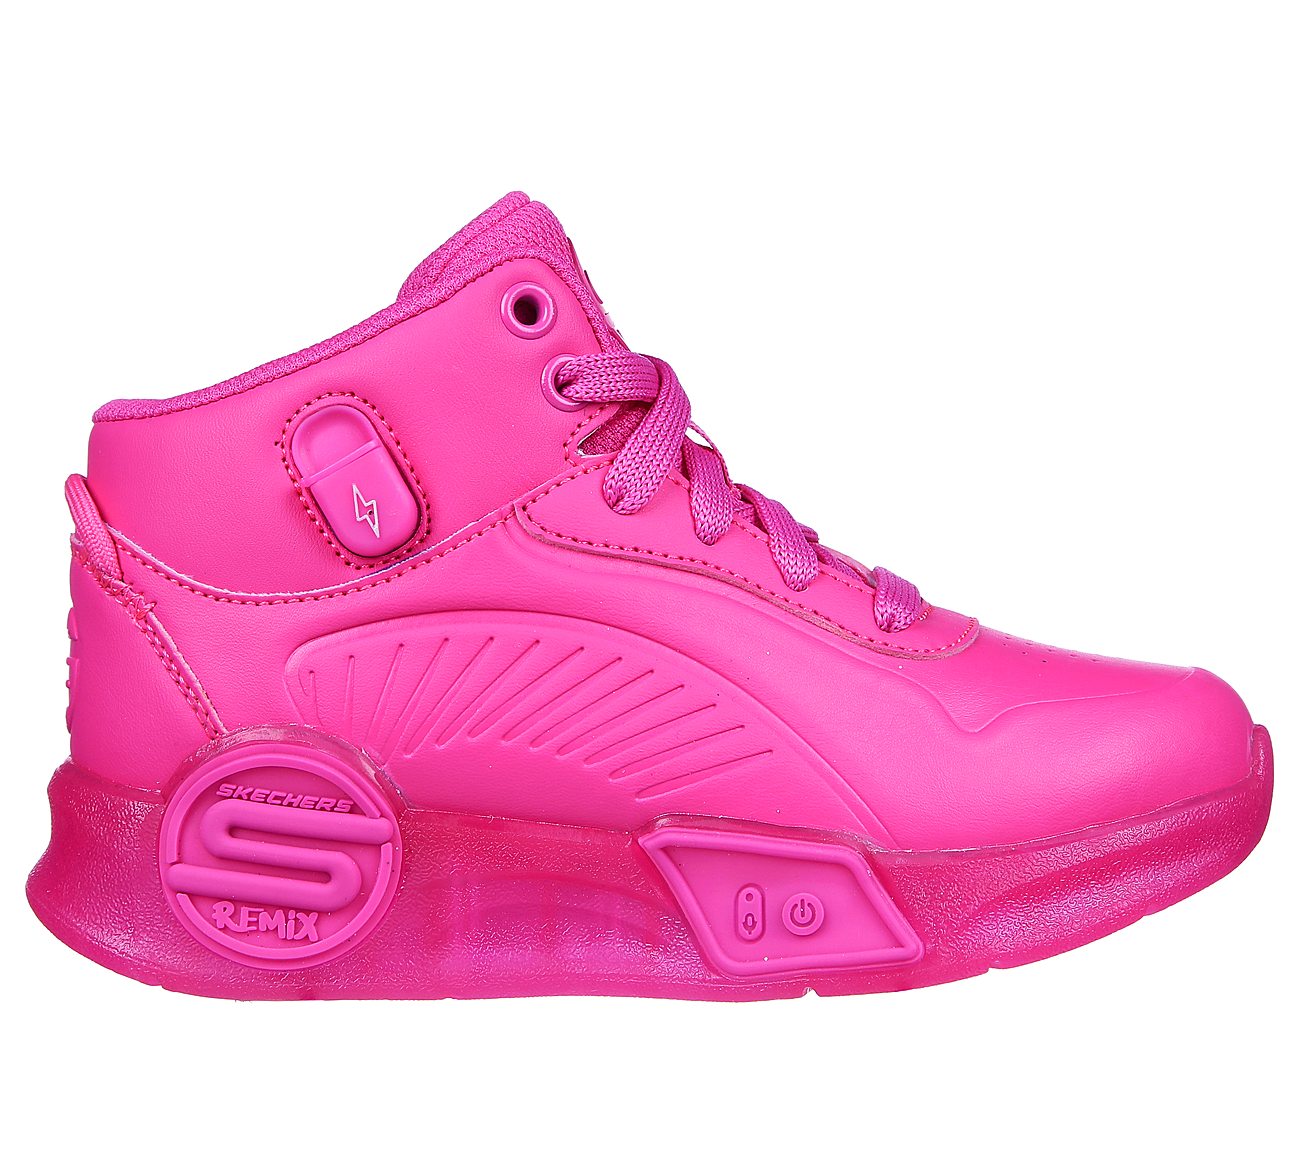 S-LIGHTS REMIX, HHOT PINK Footwear Lateral View